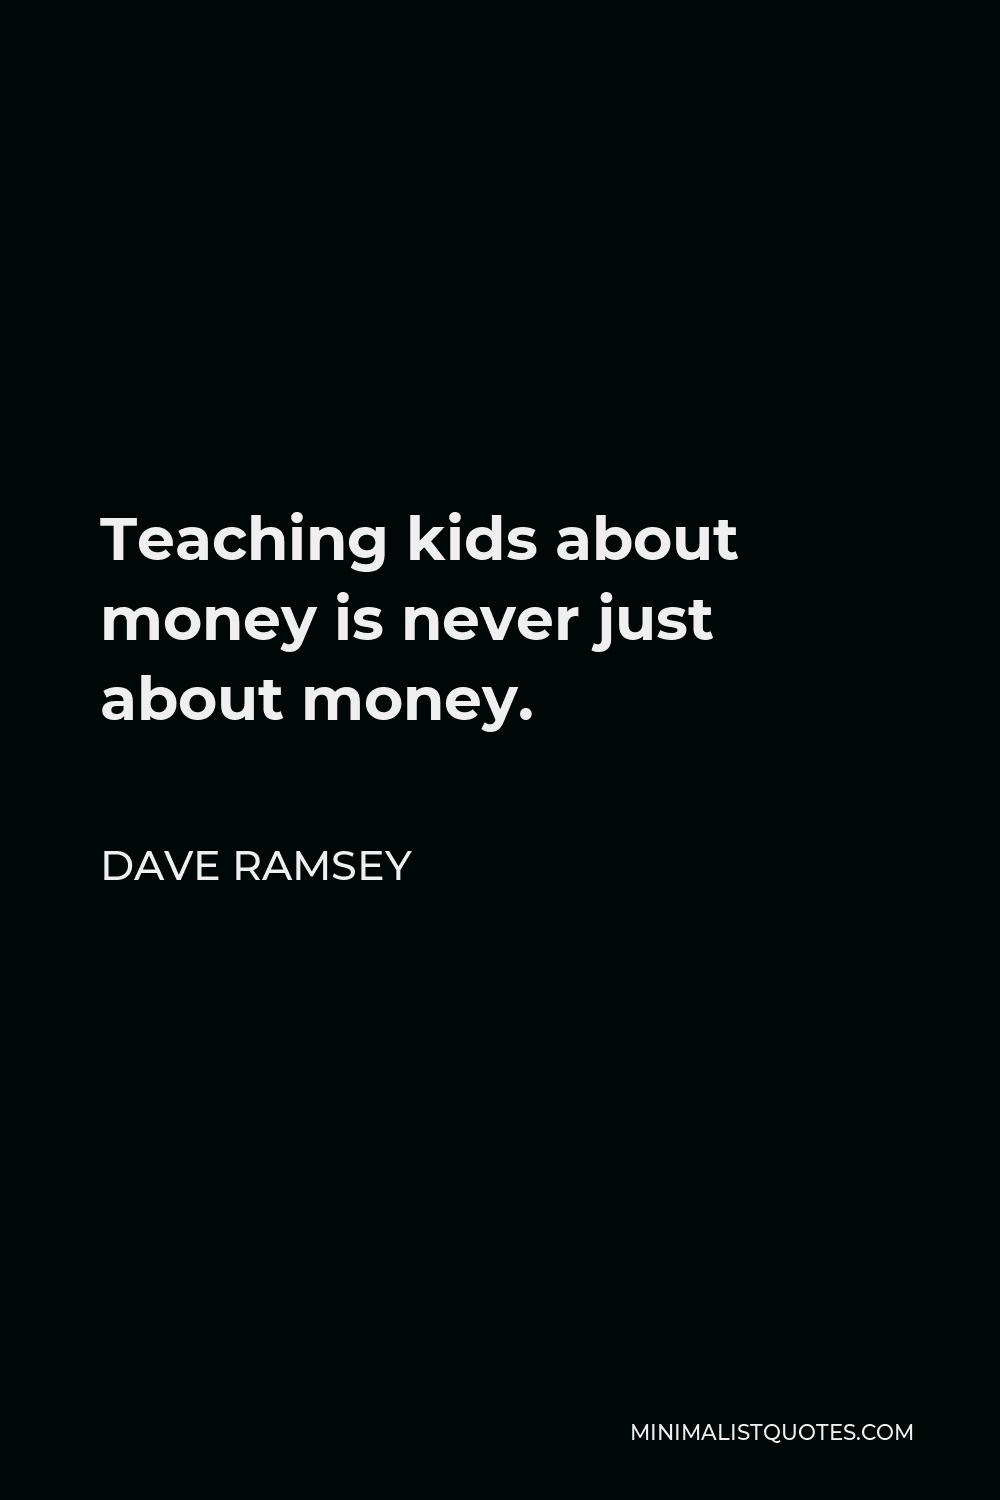 Dave Ramsey Quote - Teaching kids about money is never just about money.